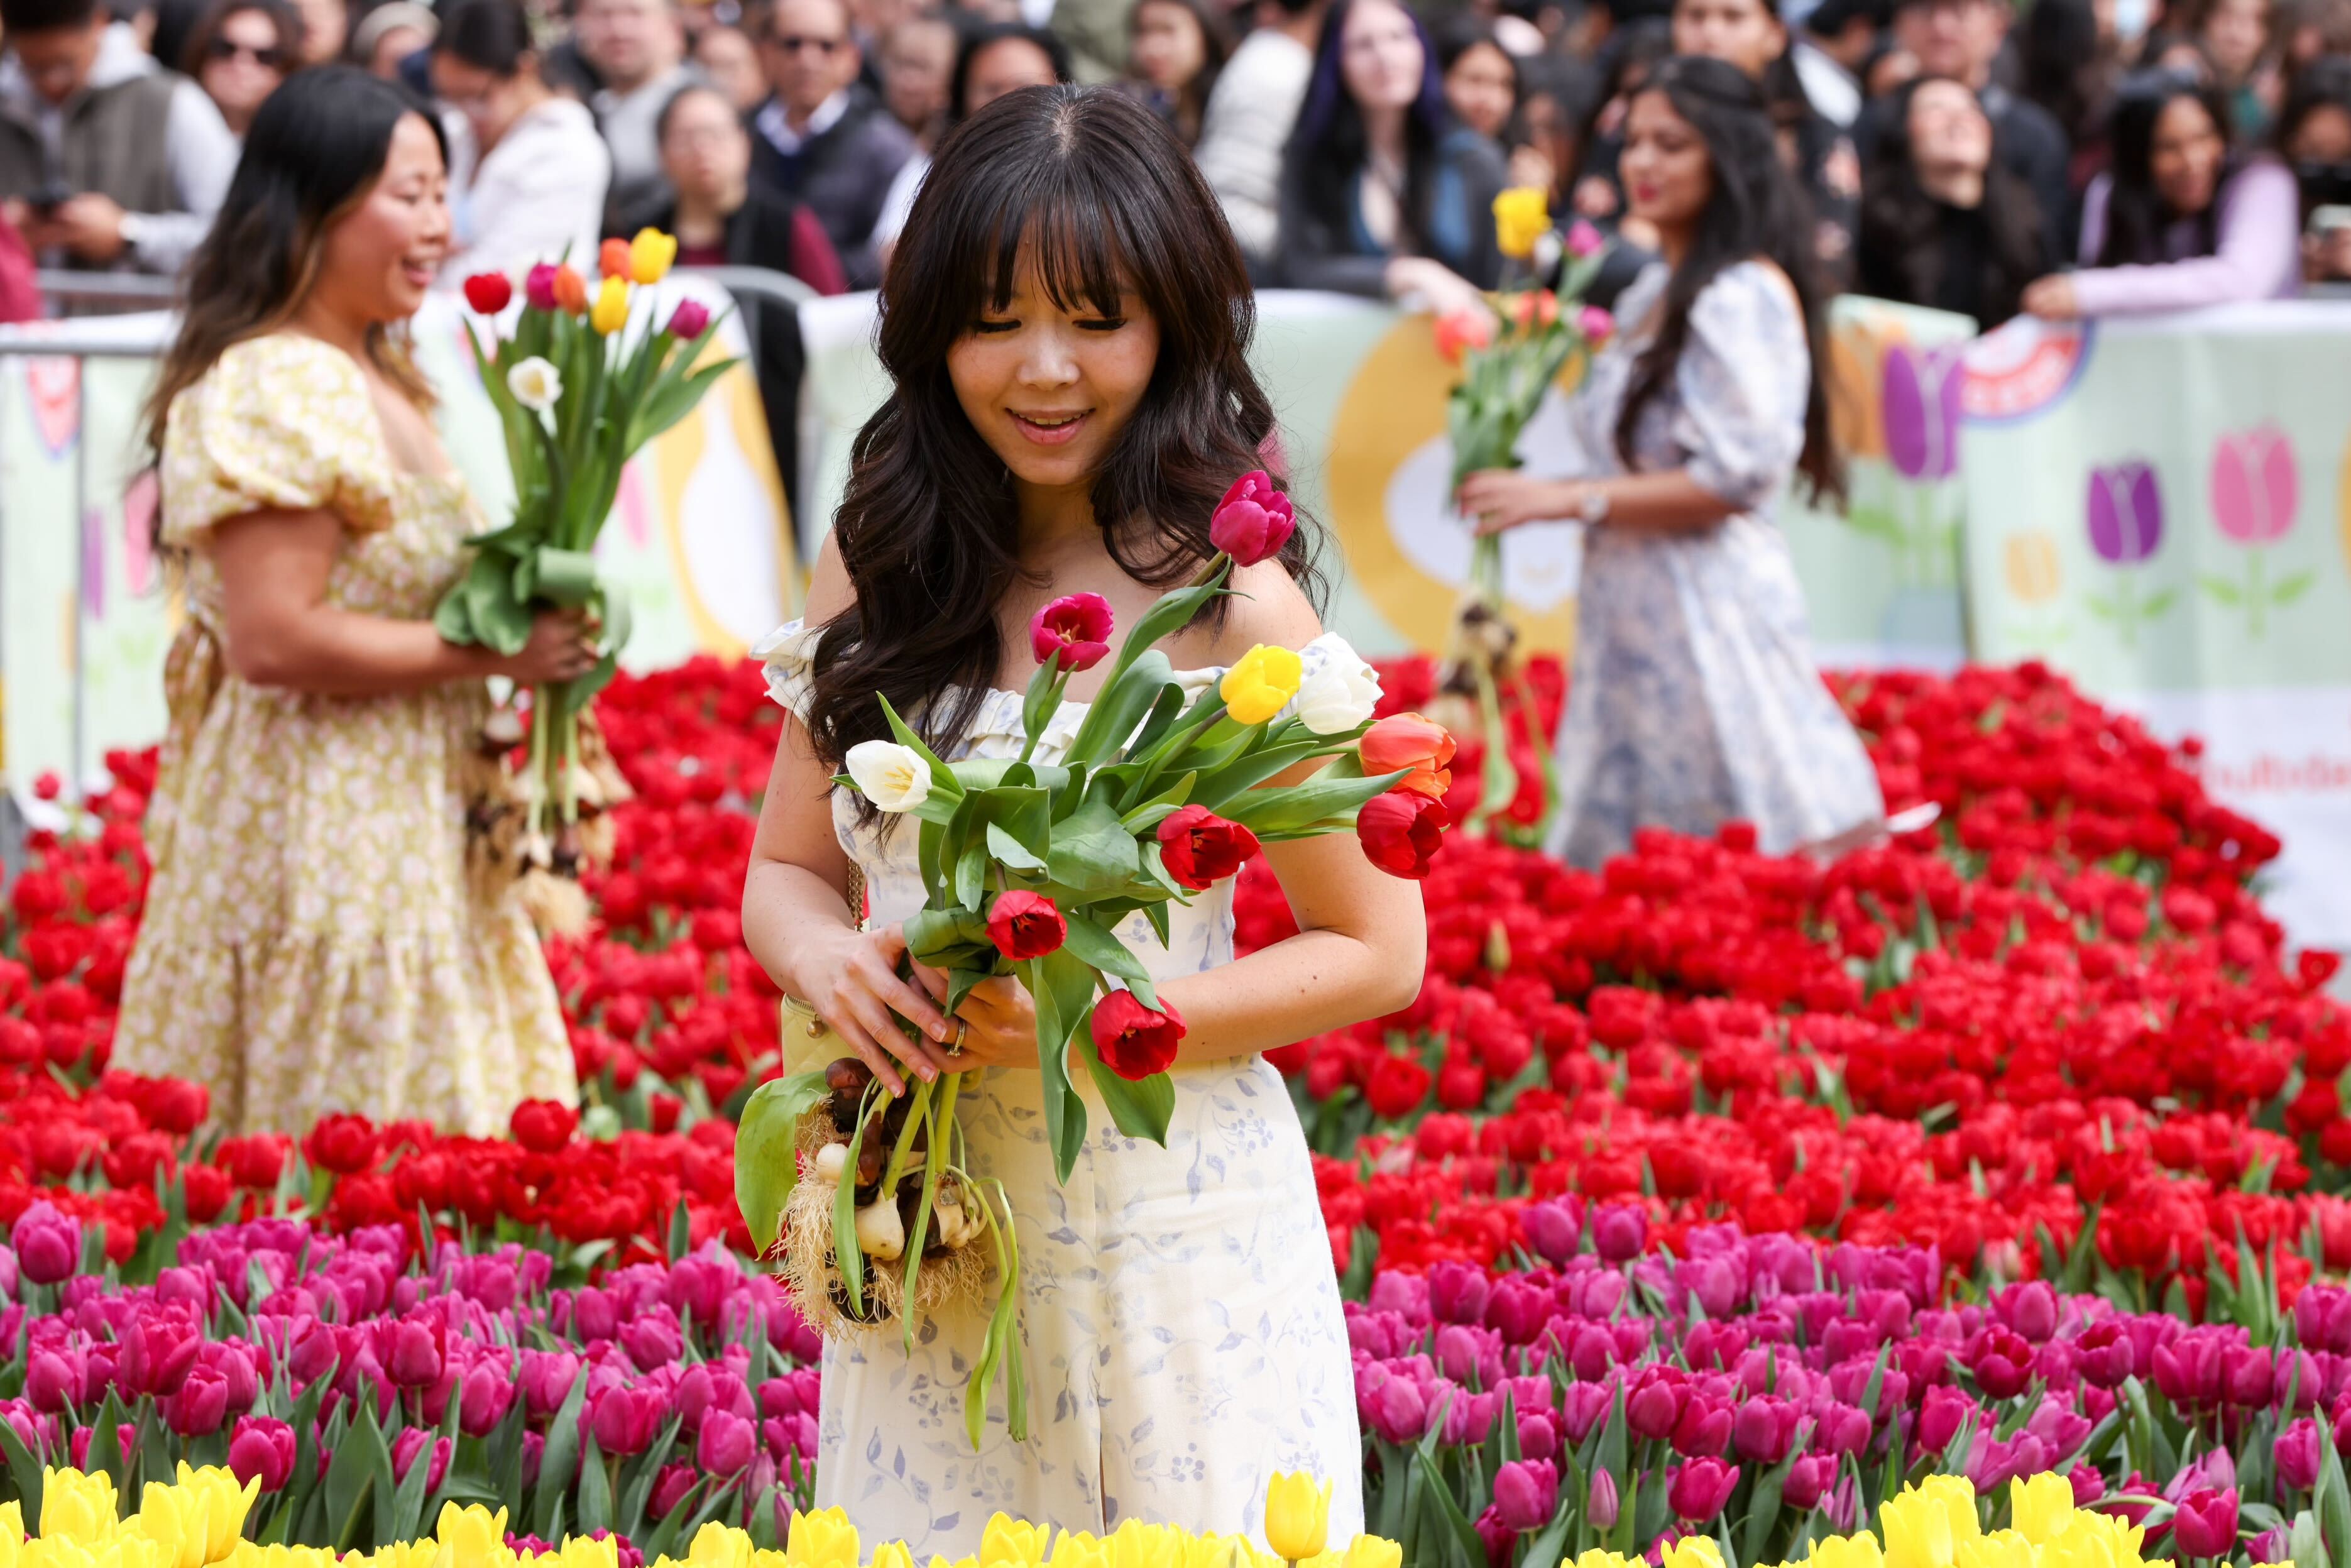 A woman holding tulips stands amid a colorful tulip field, with people and banners in the background.